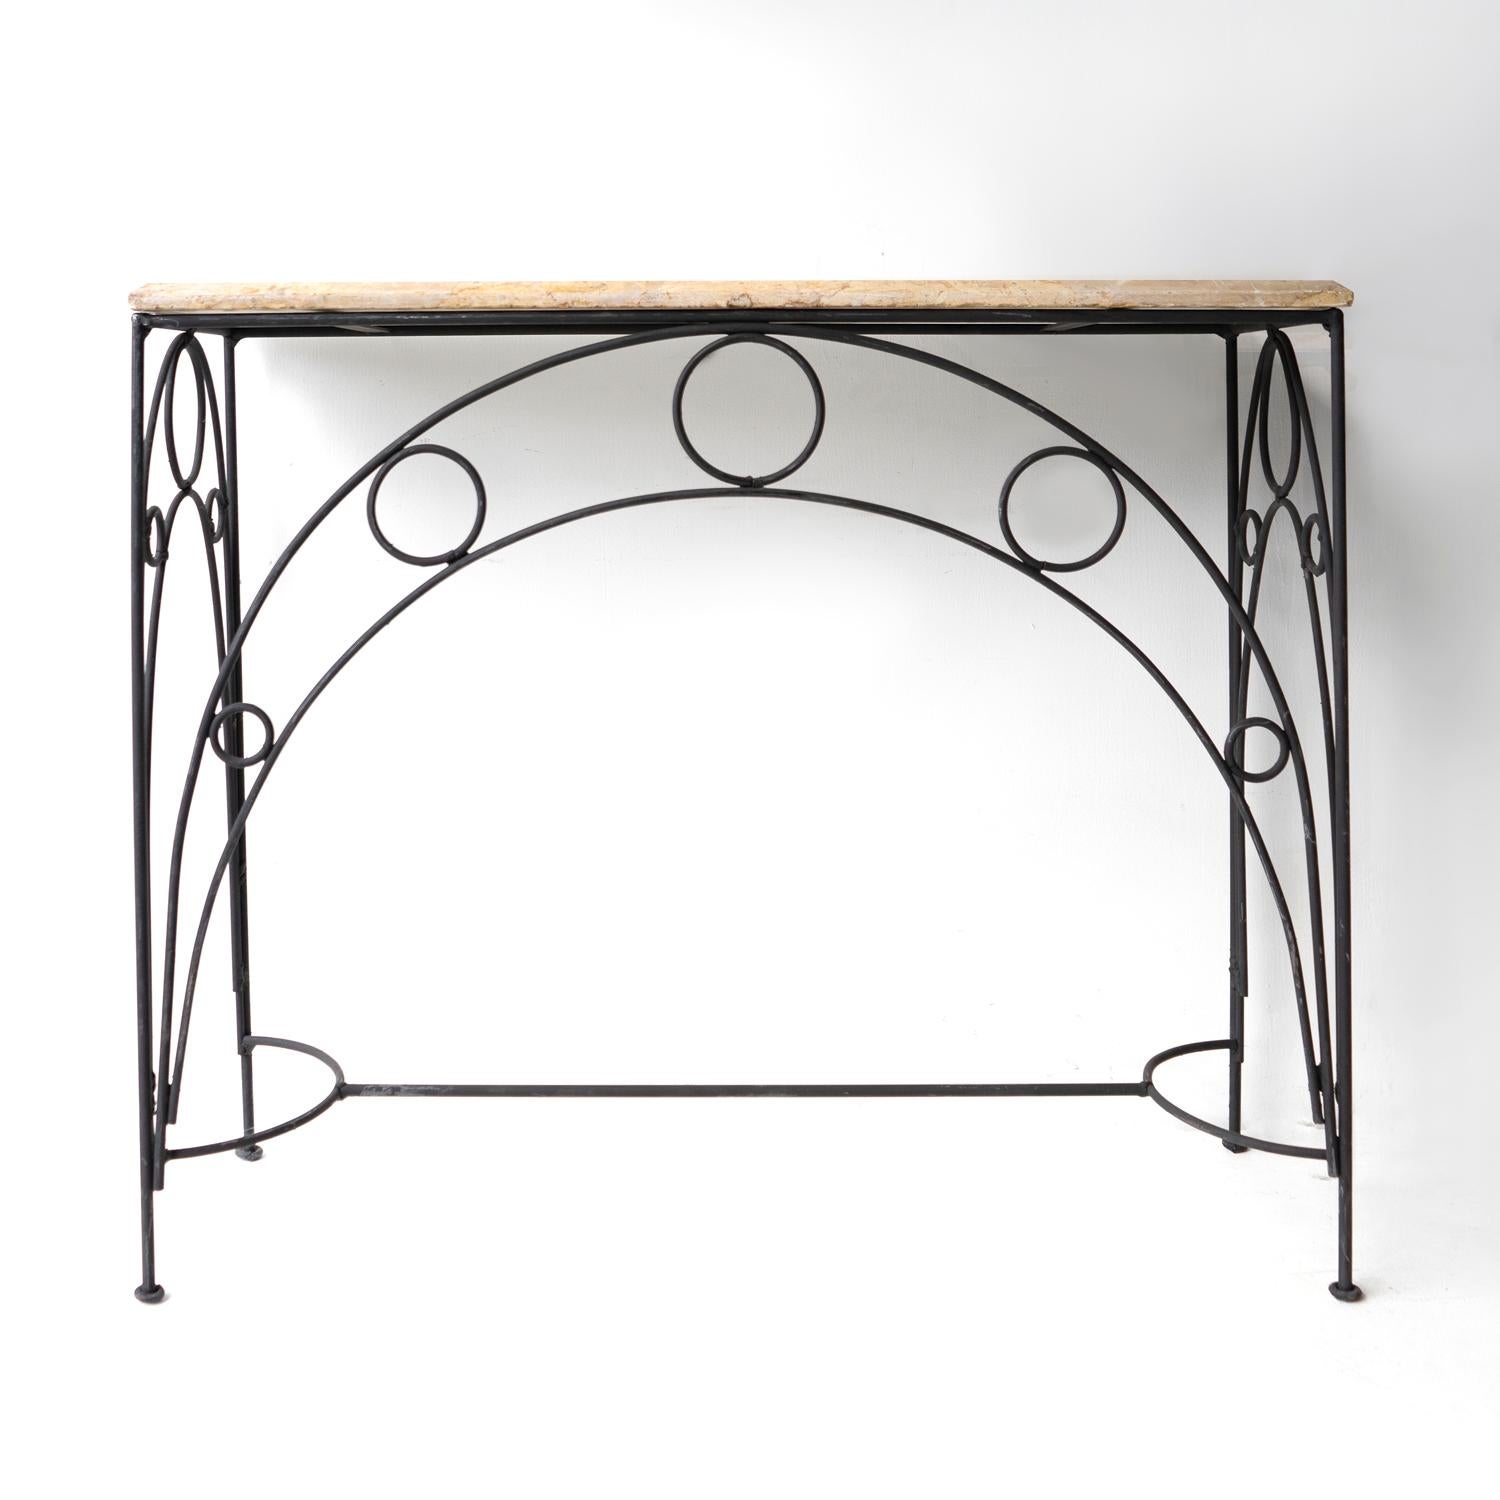 Iron Vintage French Marble And Wrought Metal Console Table, Mid 20th Century